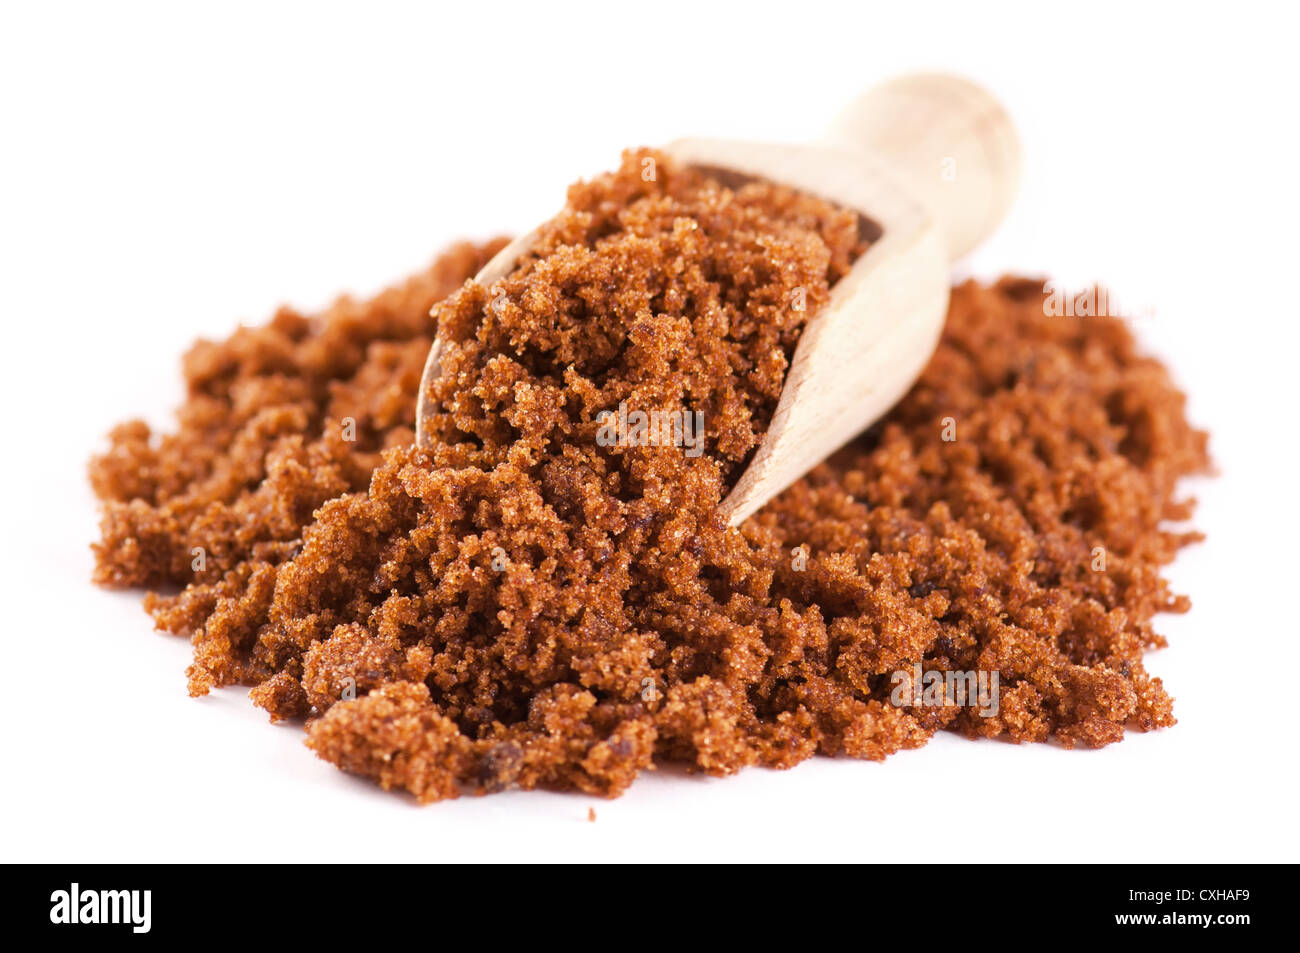 Muscovado Sugar: What It Is and When to Use It